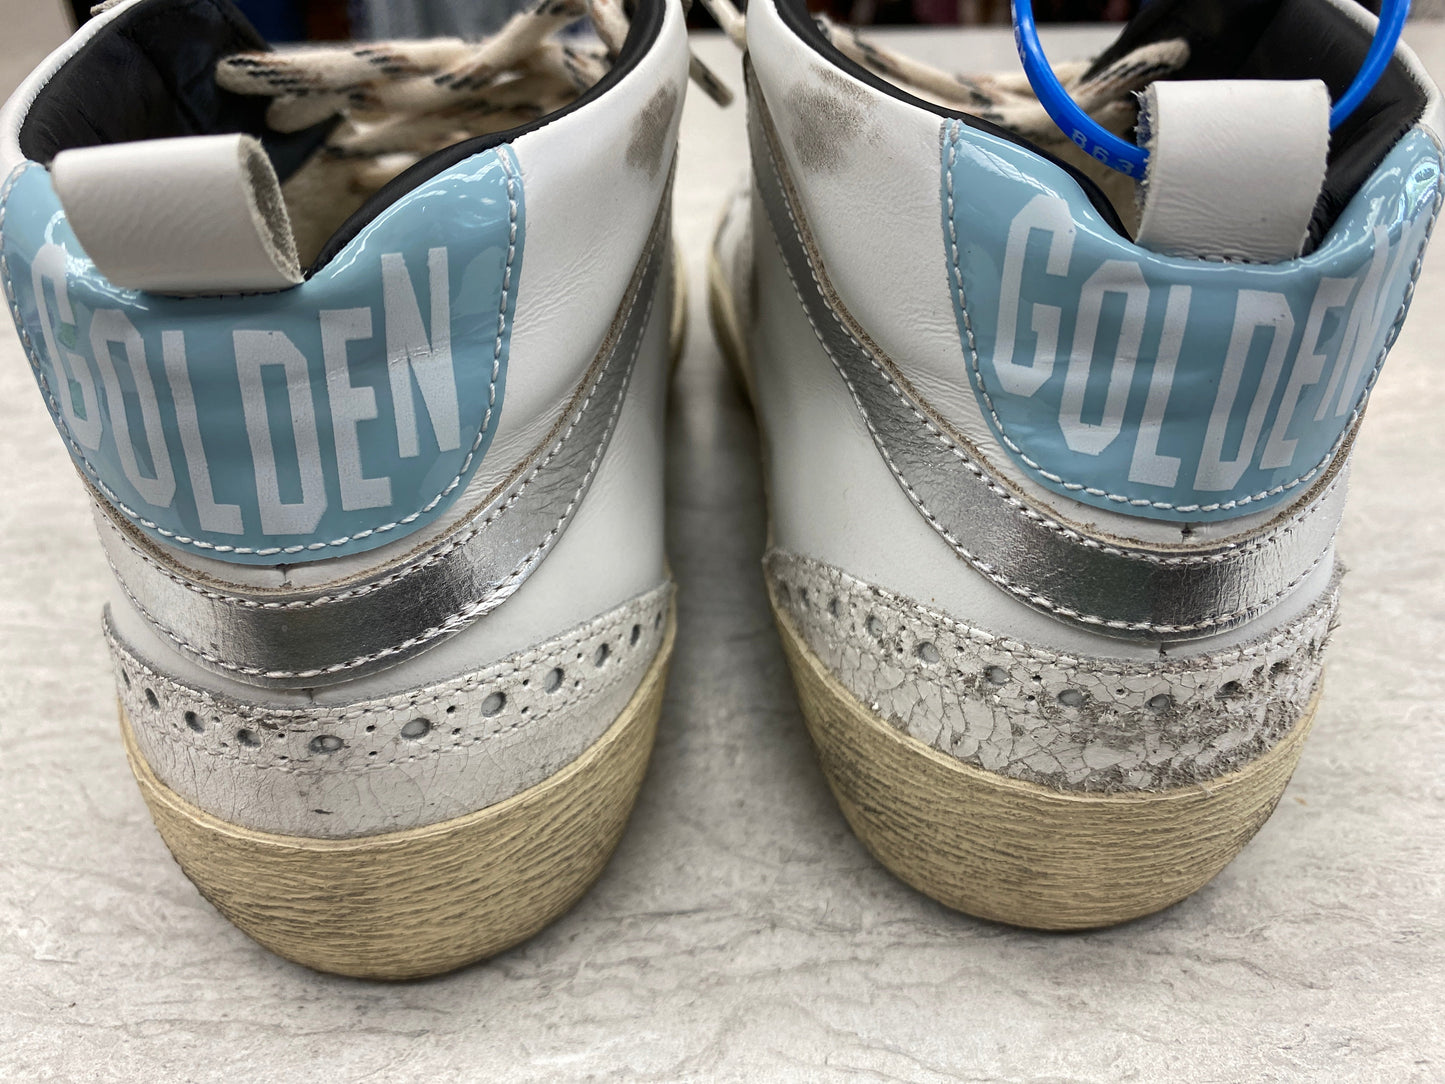 Shoes Sneakers By Golden Goose  Size: 10